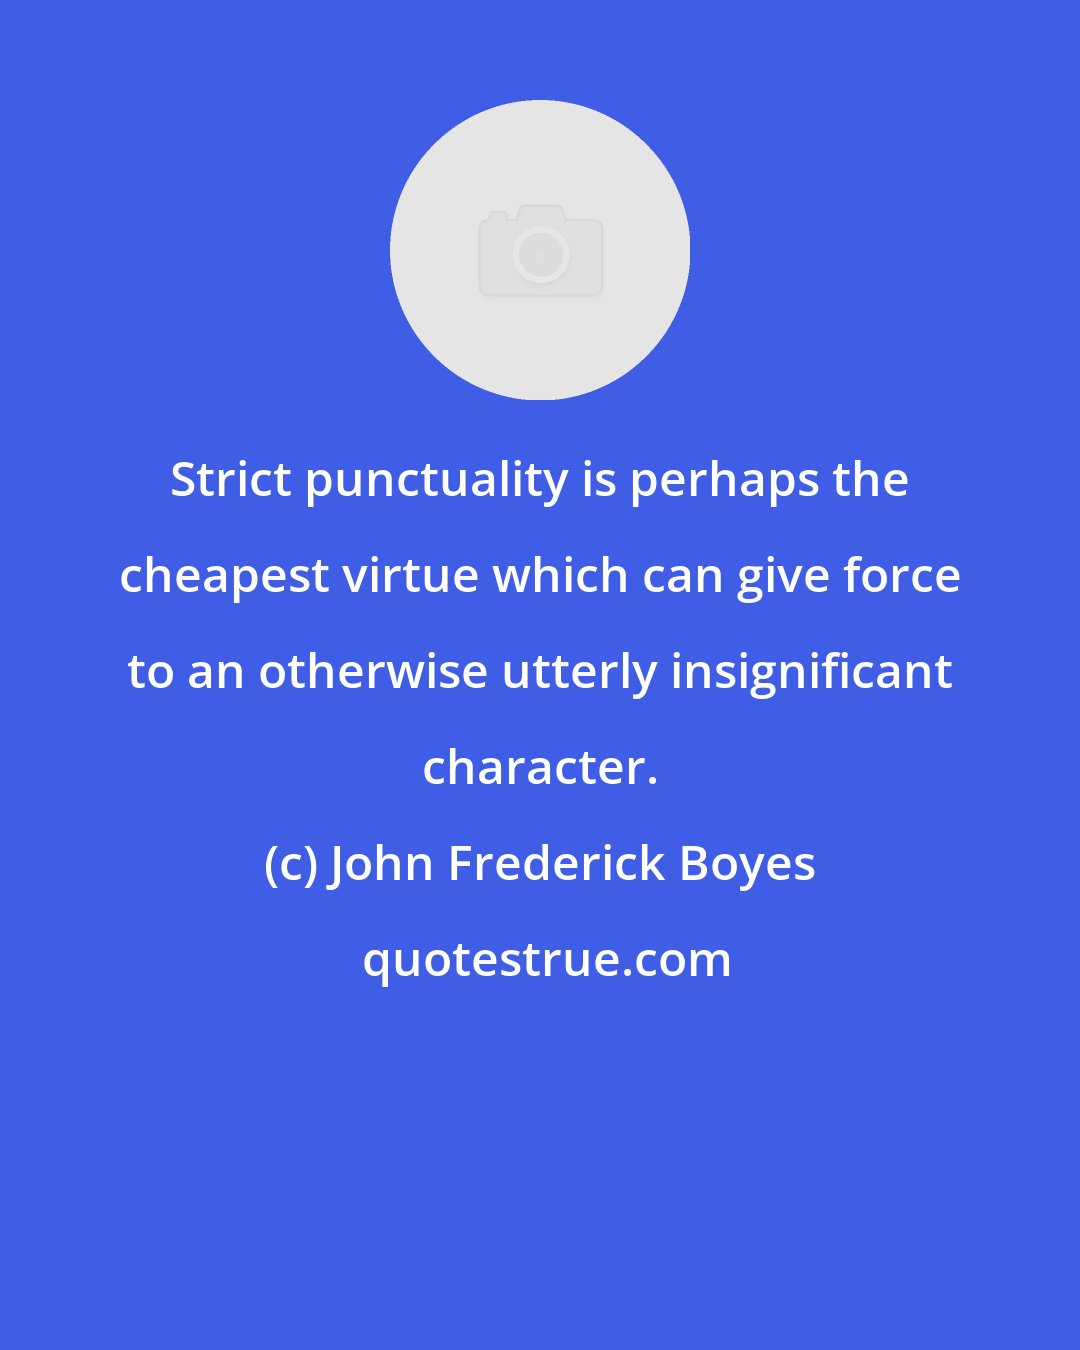 John Frederick Boyes: Strict punctuality is perhaps the cheapest virtue which can give force to an otherwise utterly insignificant character.